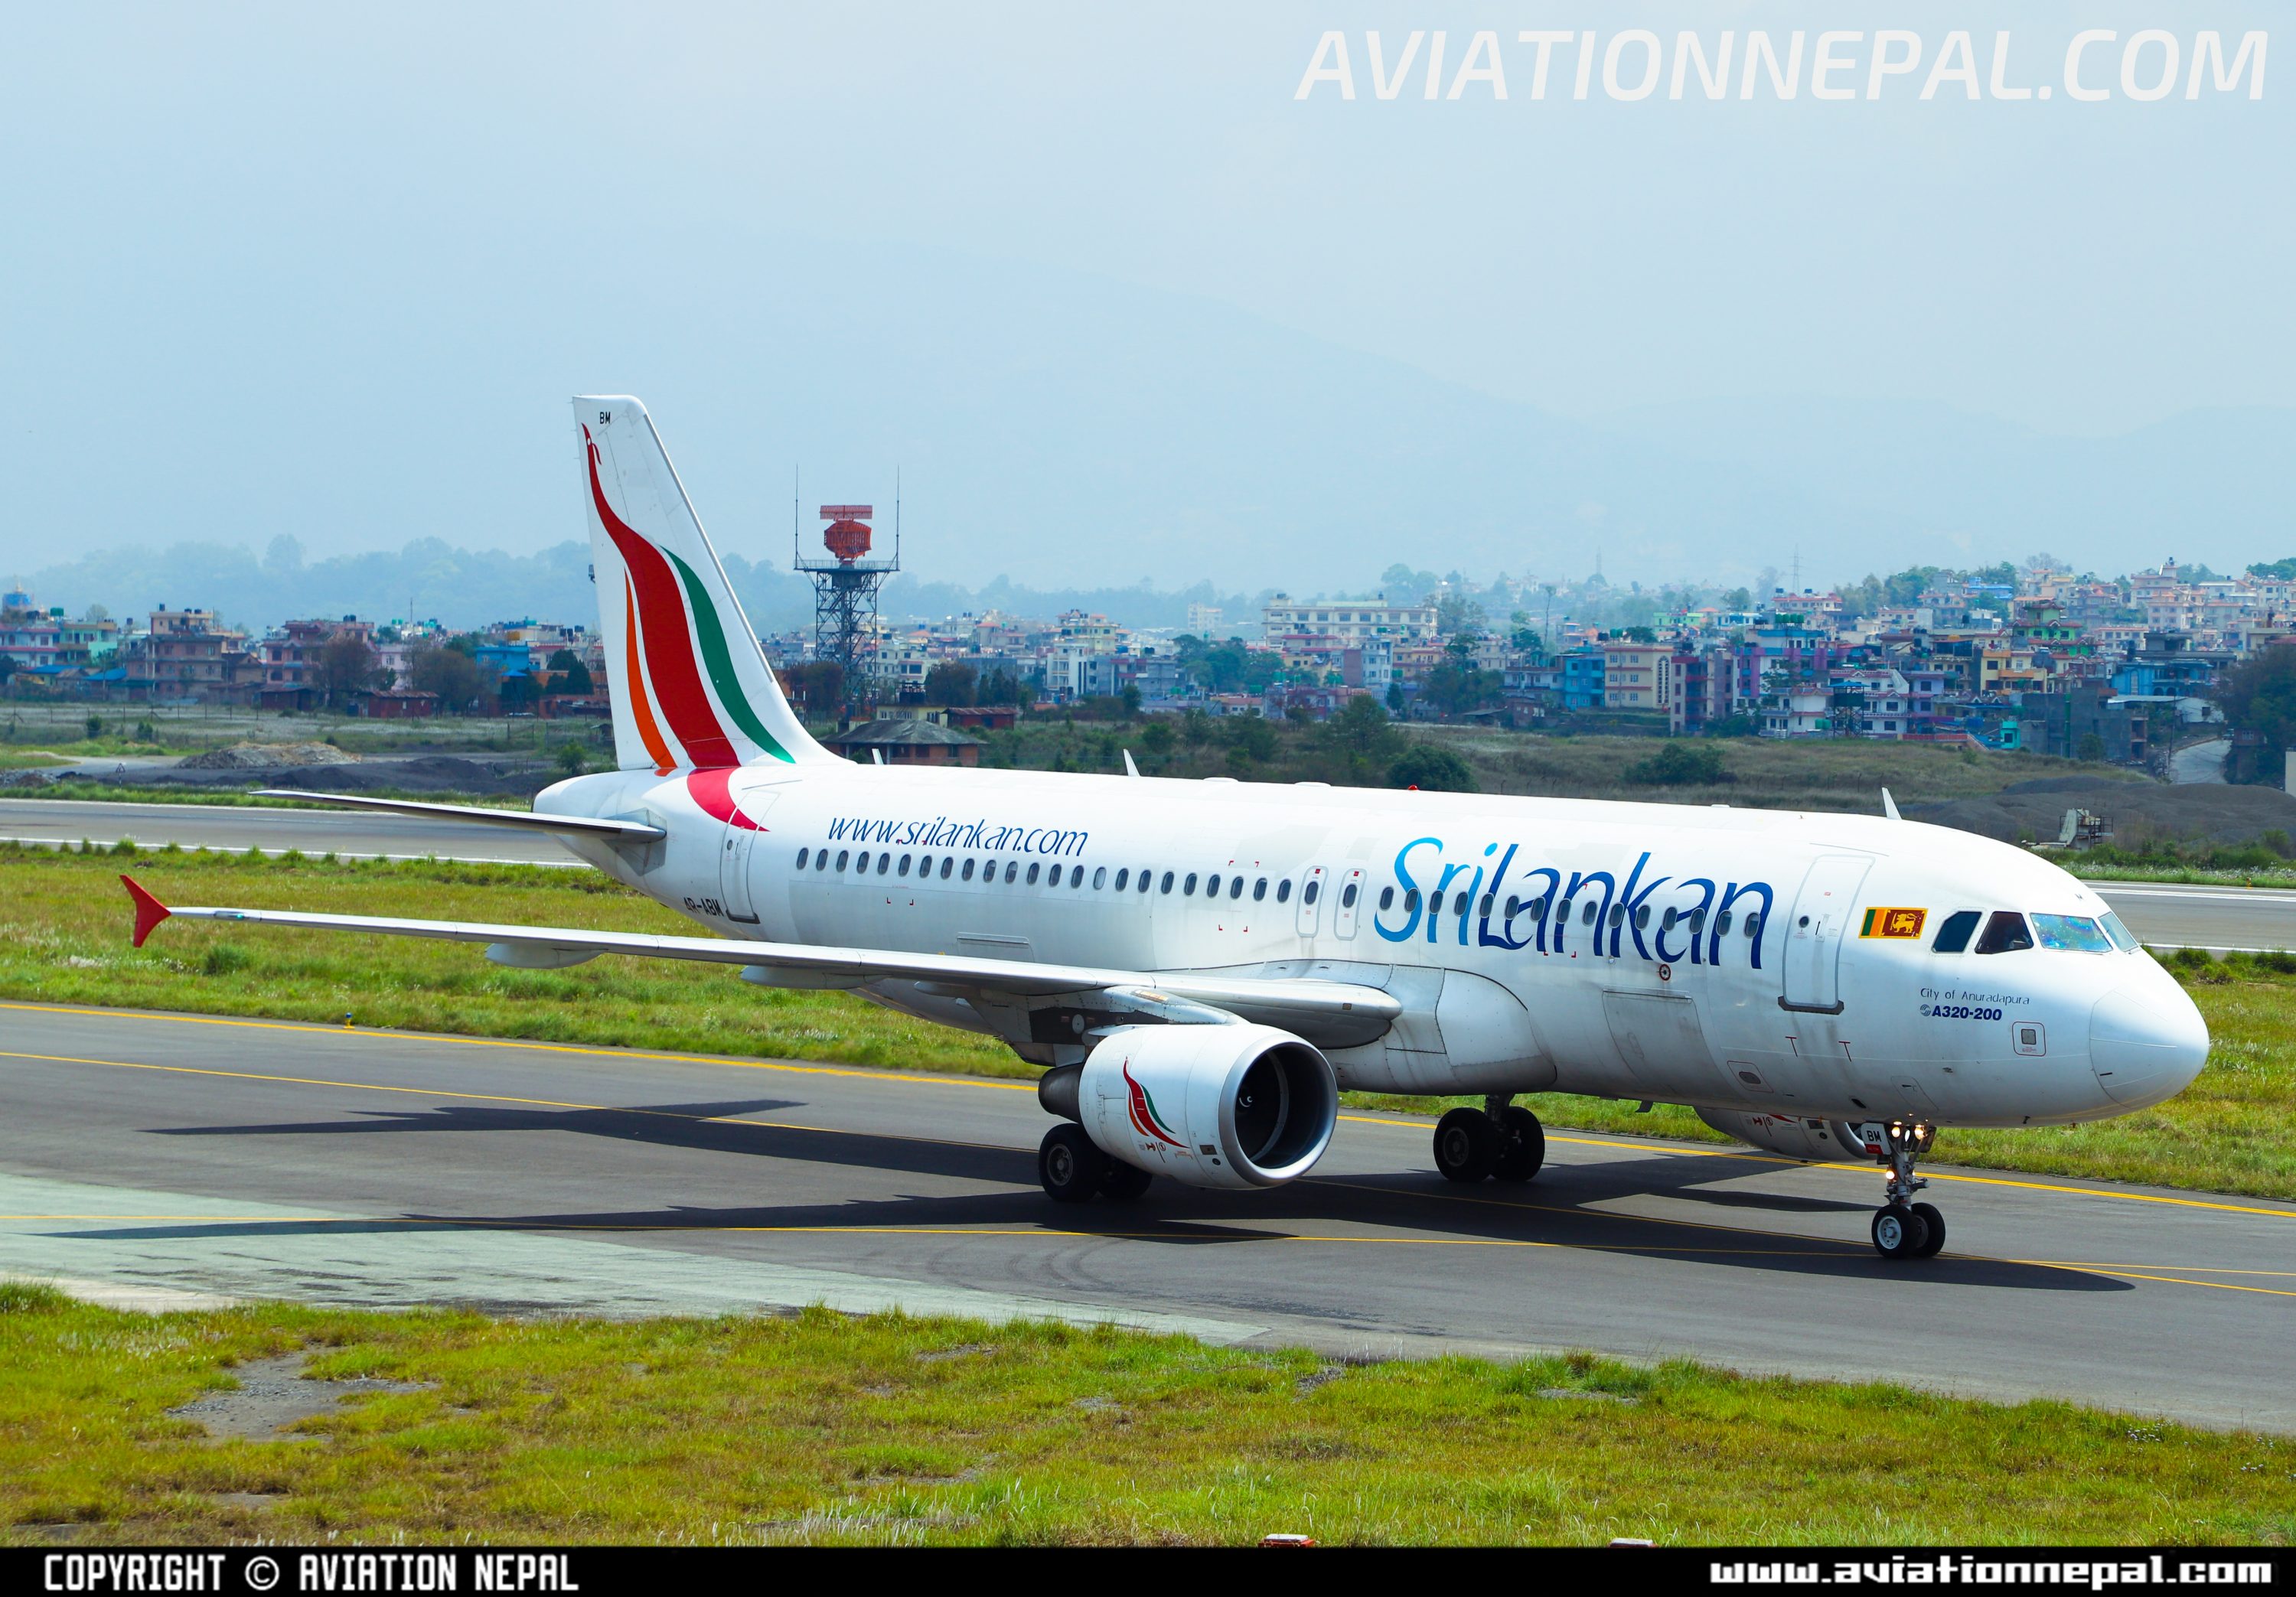 Sirlankan Airlines A320 taxing at TIA aviationnepal.com .jpg - Travel News, Insights & Resources.